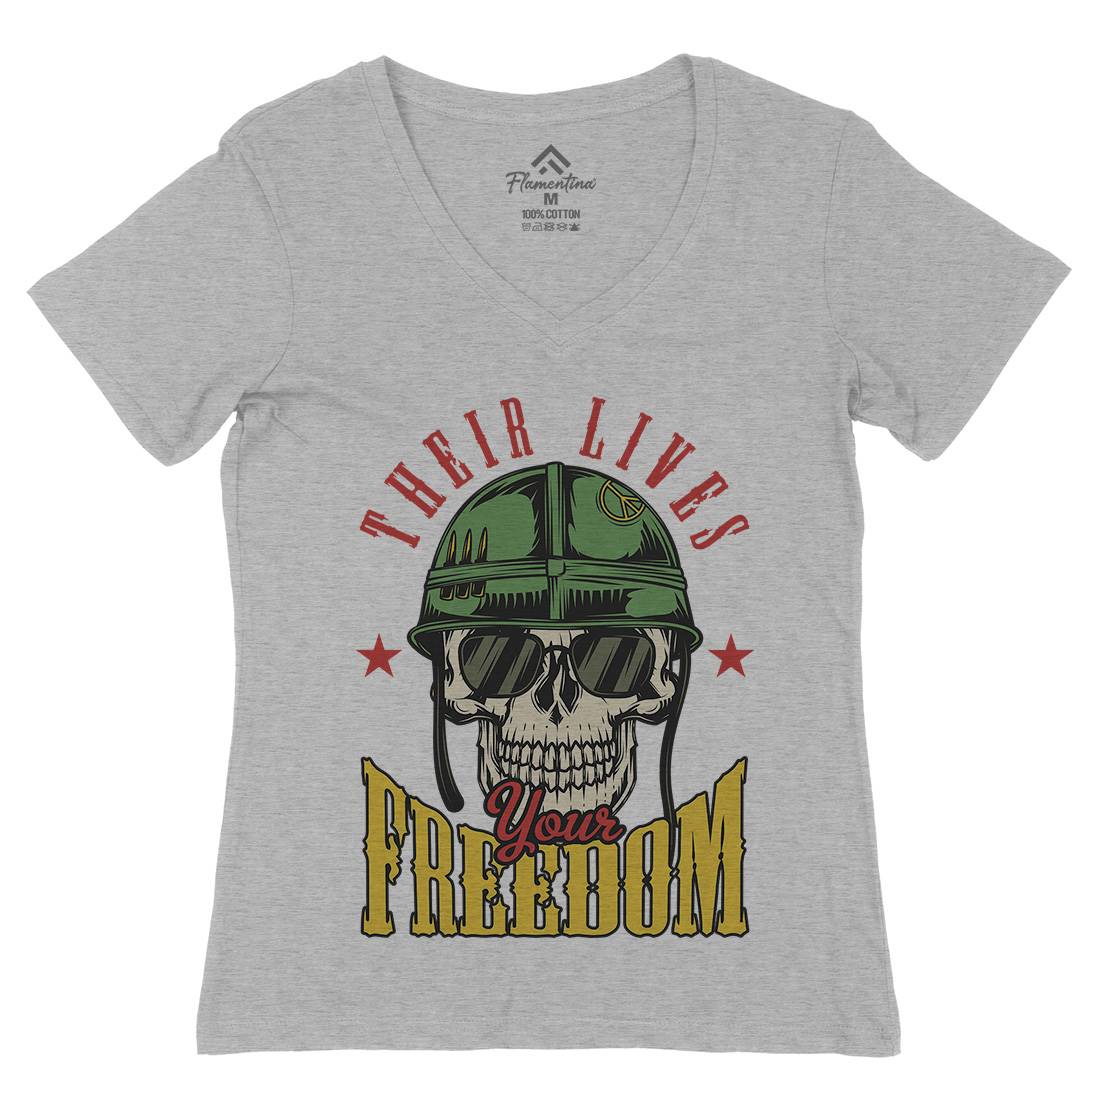 Your Freedom Womens Organic V-Neck T-Shirt Army C899